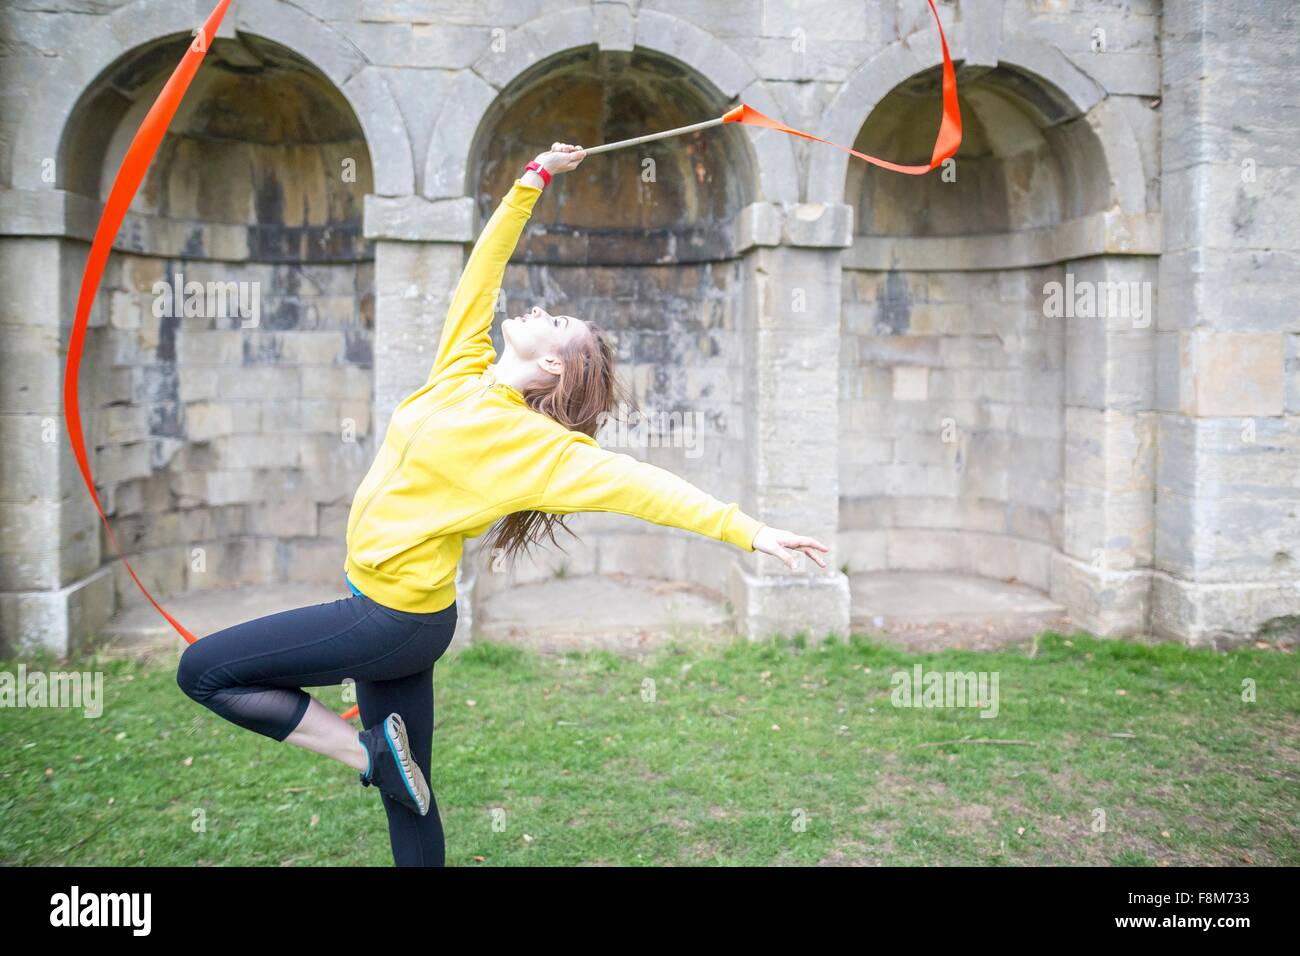 Young woman practising ribbon dance, walled arches in background Stock Photo